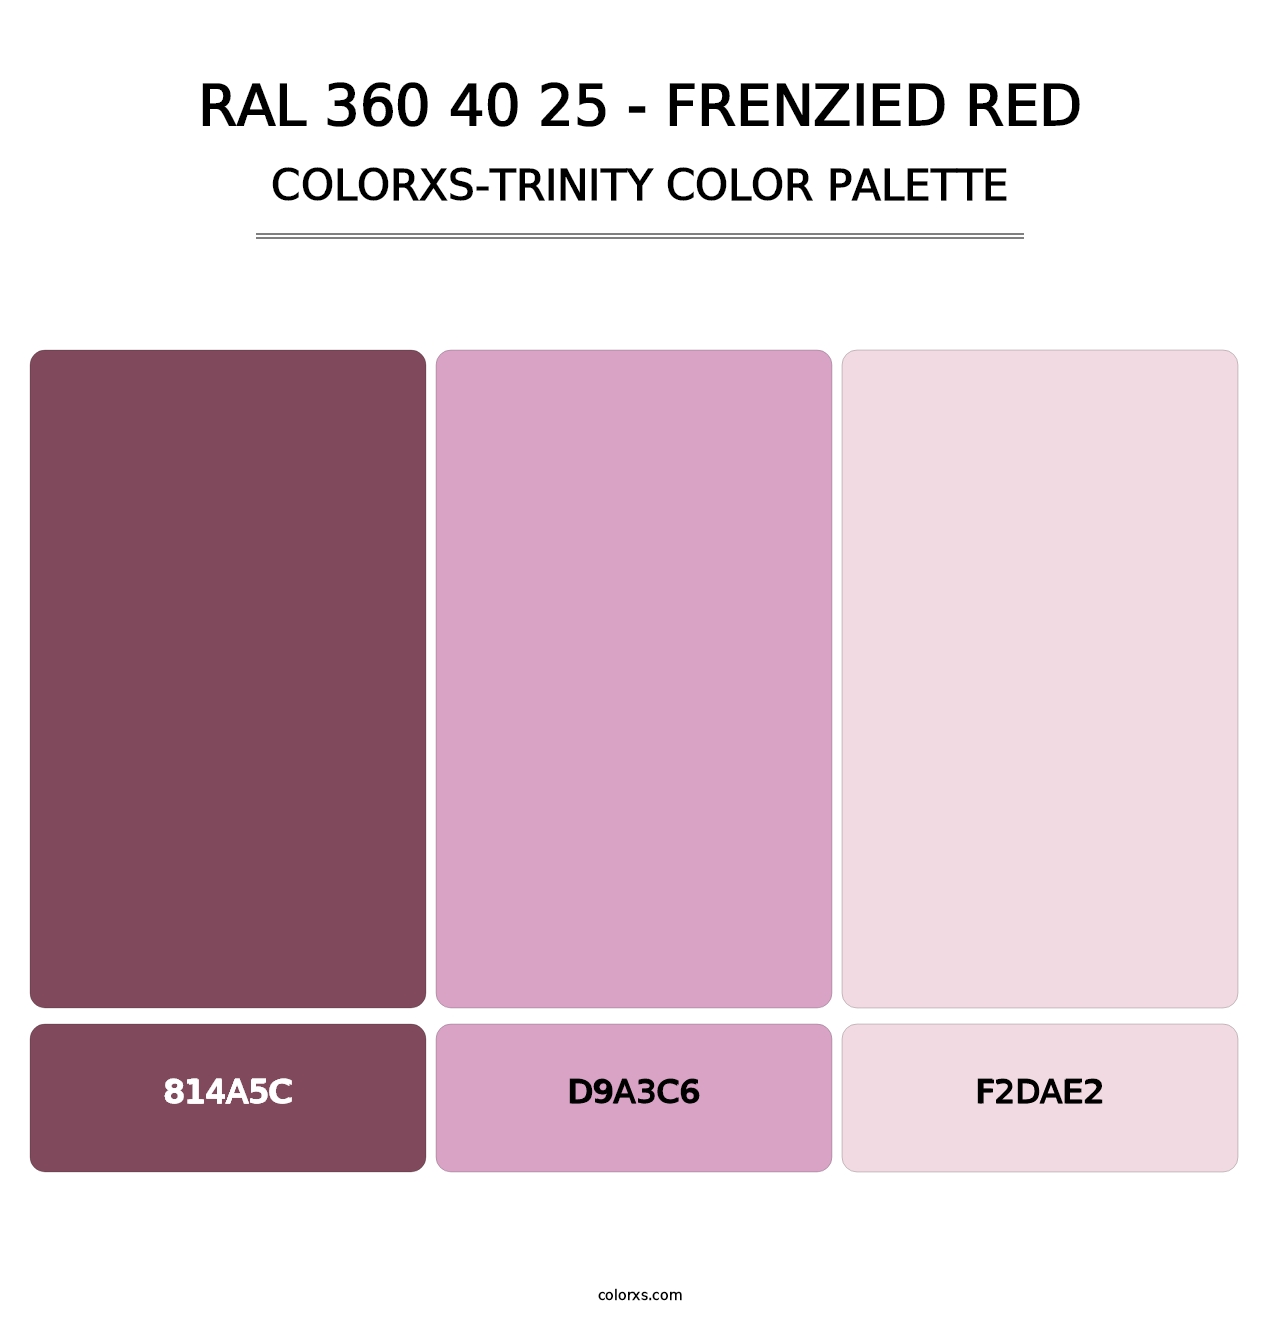 RAL 360 40 25 - Frenzied Red - Colorxs Trinity Palette